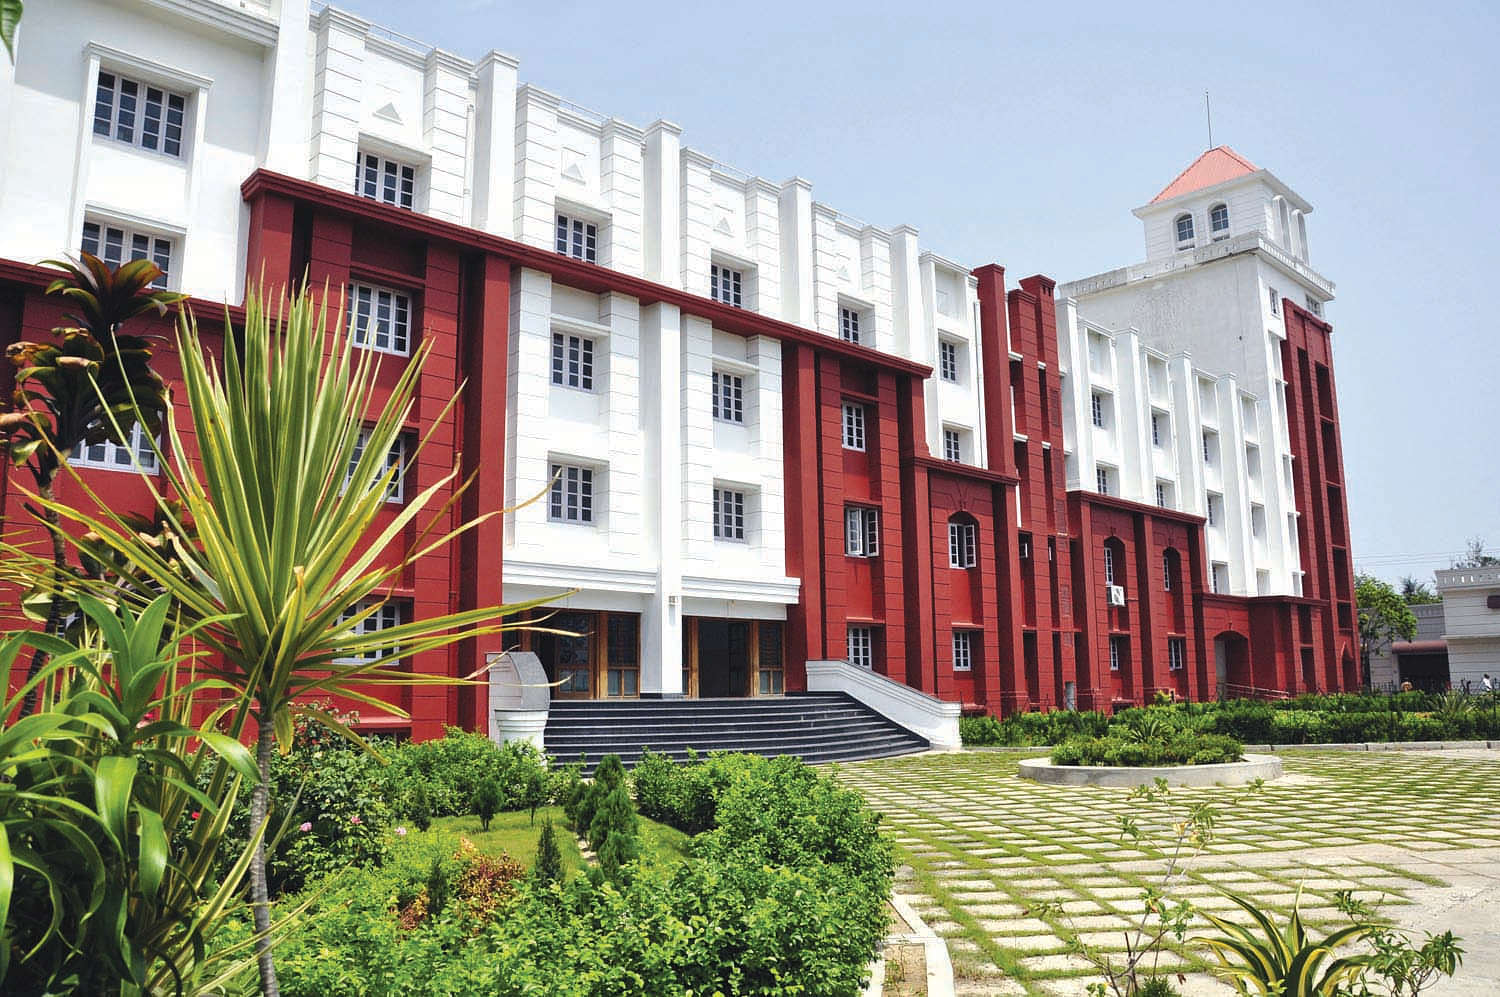 Computer Center at OmDayal Group of Institutions